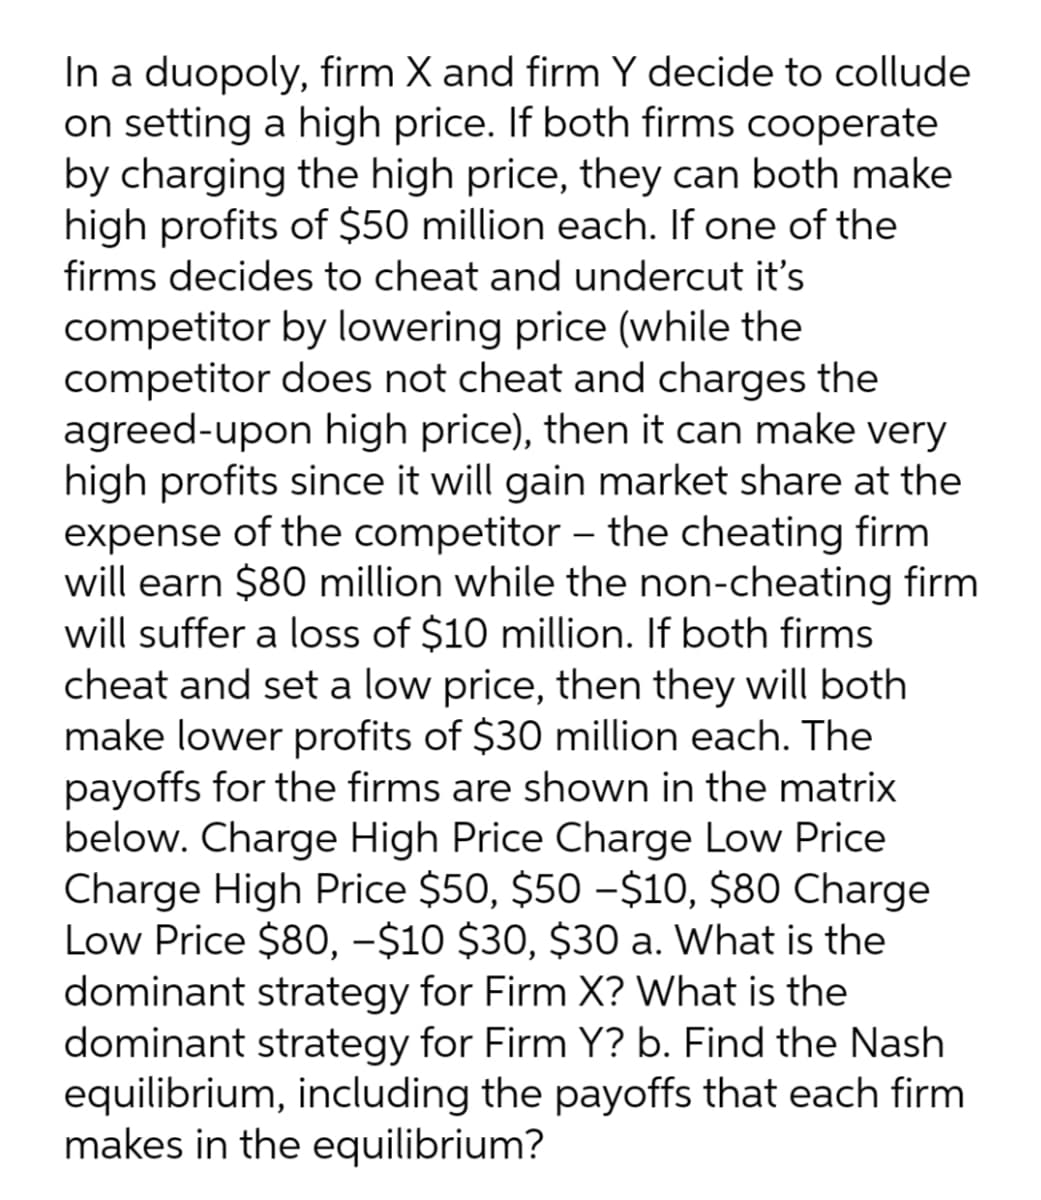 In a duopoly, firm X and firm Y decide to collude
on setting a high price. If both firms cooperate
by charging the high price, they can both make
high profits of $50 million each. If one of the
firms decides to cheat and undercut it's
competitor by lowering price (while the
competitor does not cheat and charges the
agreed-upon high price), then it can make very
high profits since it will gain market share at the
expense of the competitor – the cheating firm
will earn $80 million while the non-cheating firm
will suffer a loss of $10 million. If both firms
cheat and set a low price, then they will both
make lower profits of $30 million each. The
payoffs for the firms are shown in the matrix
below. Charge High Price Charge Low Price
Charge High Price $50, $50 -$10, $80 Charge
Low Price $80, -$10 $30, $30 a. What is the
dominant strategy for Firm X? What is the
dominant strategy for Firm Y? b. Find the Nash
equilibrium, including the payoffs that each firm
makes in the equilibrium?
